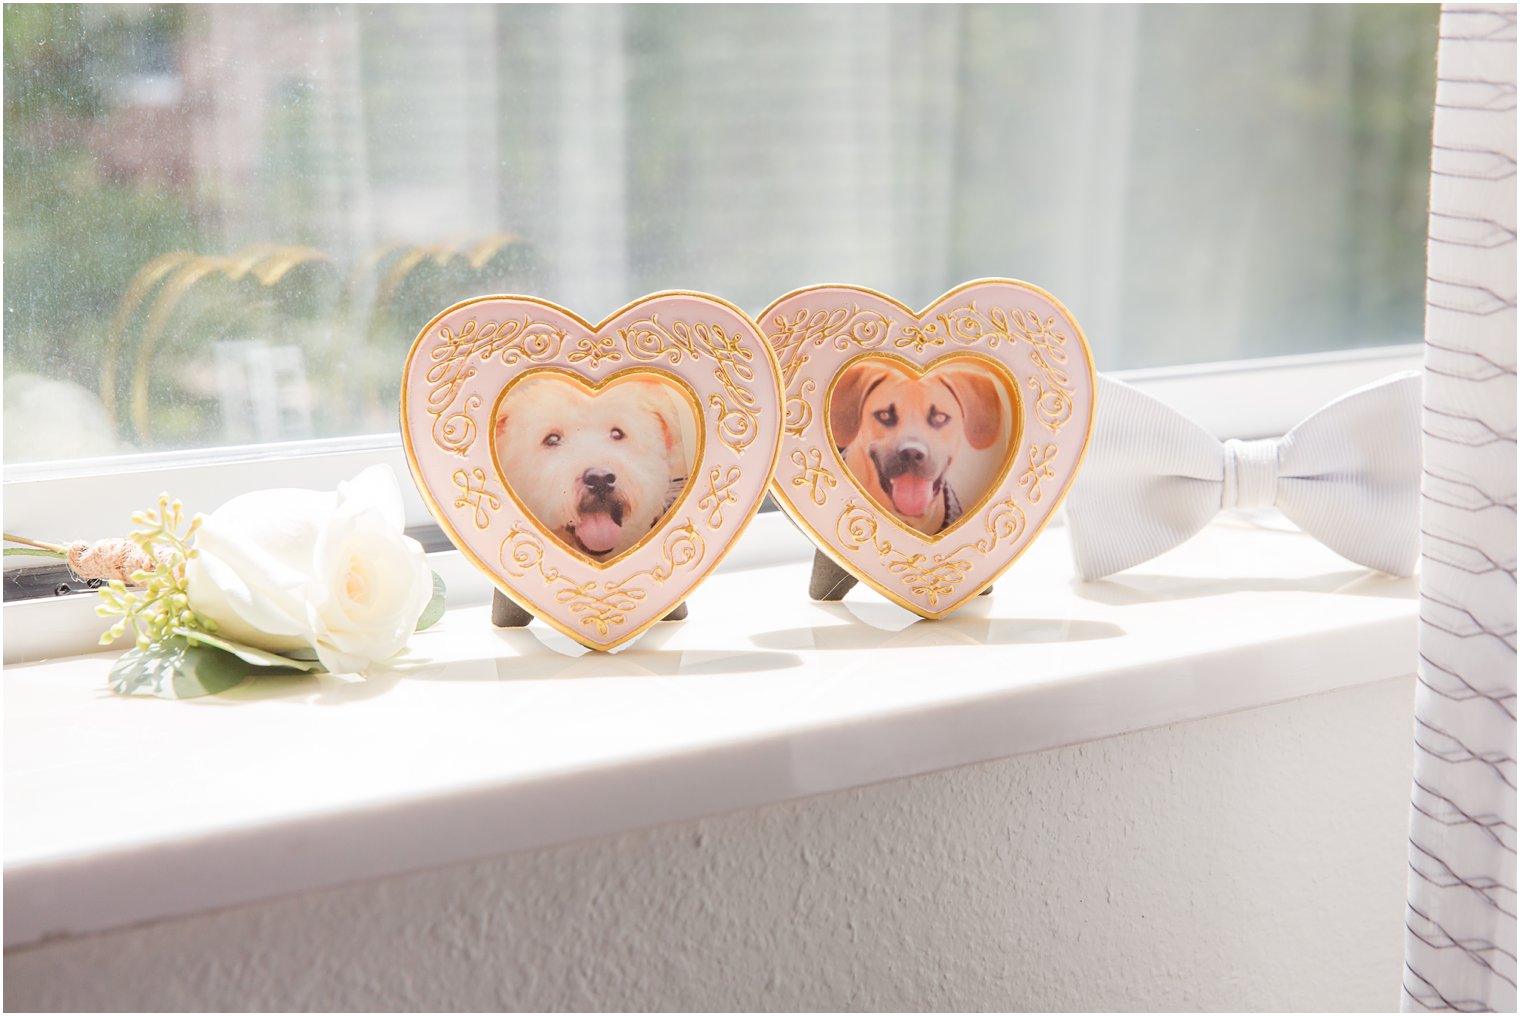 Heart-shaped frames with photos of dogs